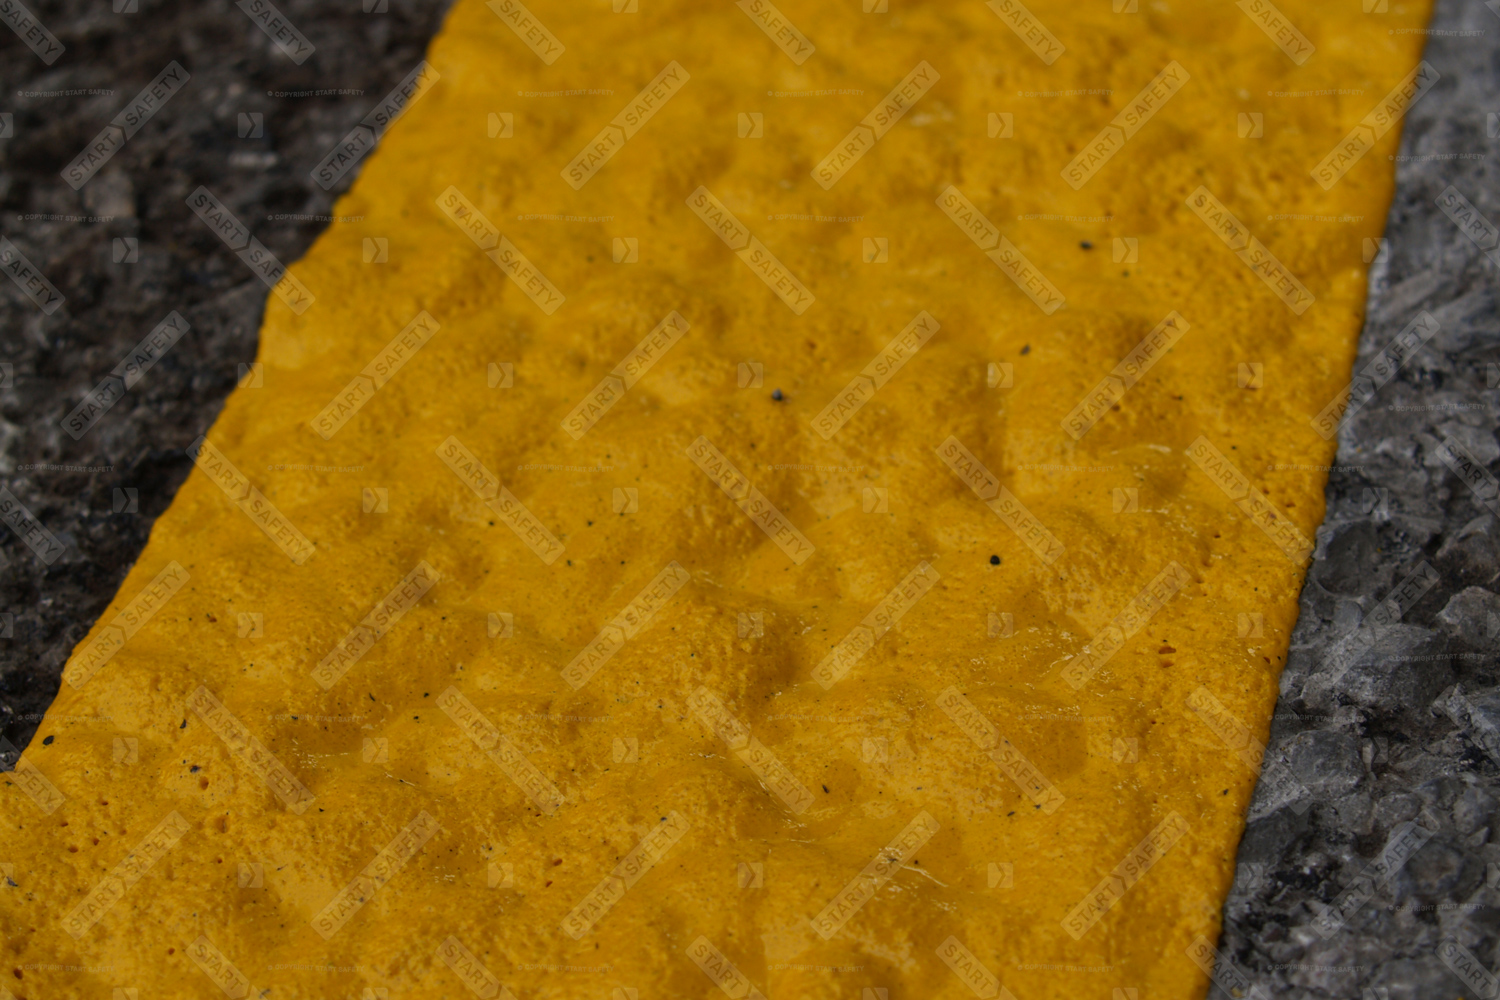 Yellow thermoplastic applied to concrete